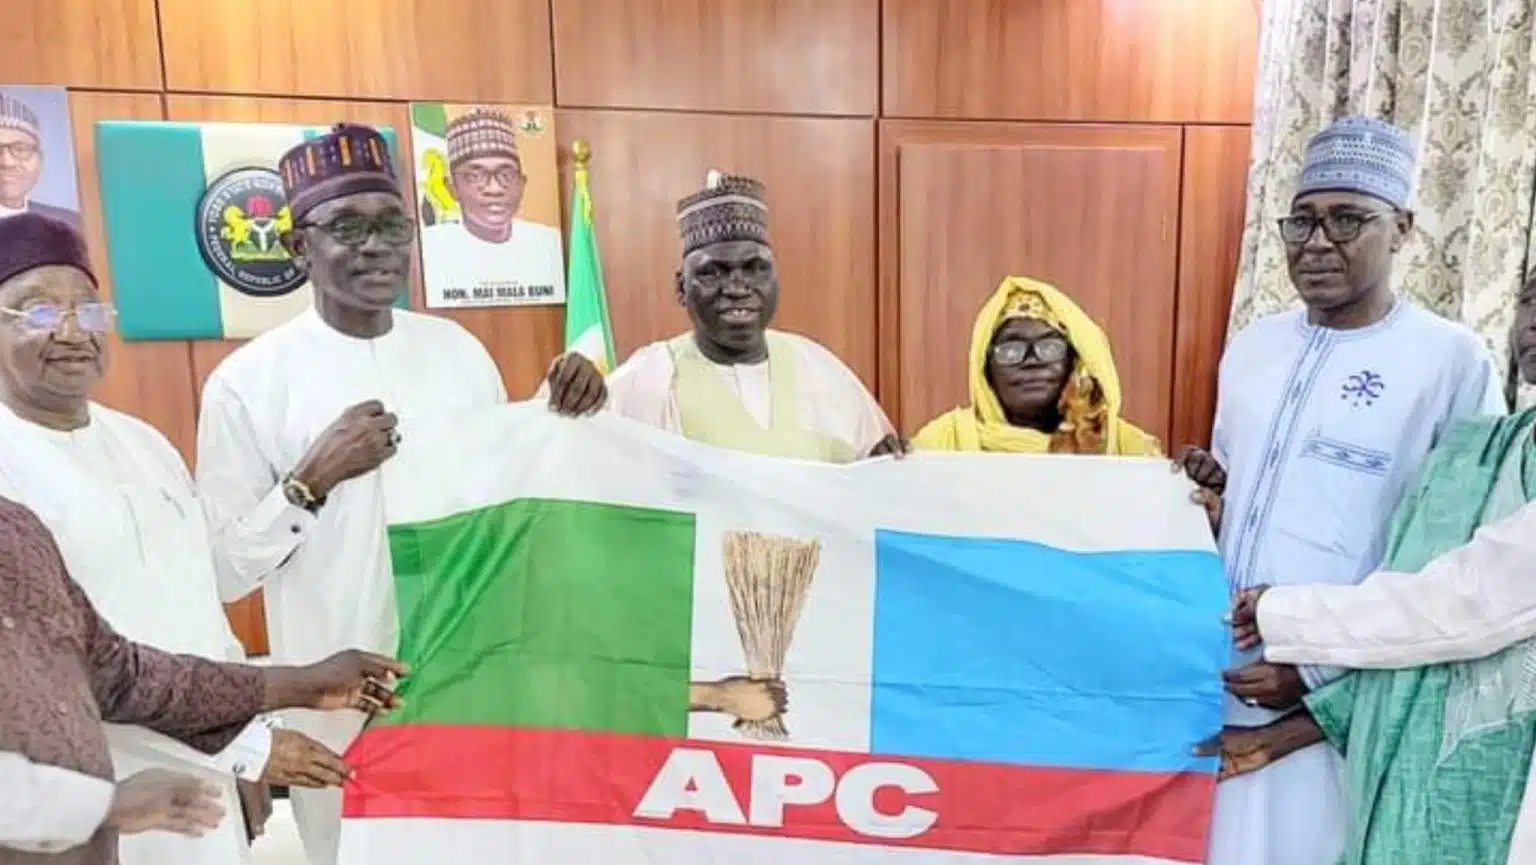 After 23 years, top PDP Chieftain dumps party for APC in Yobe